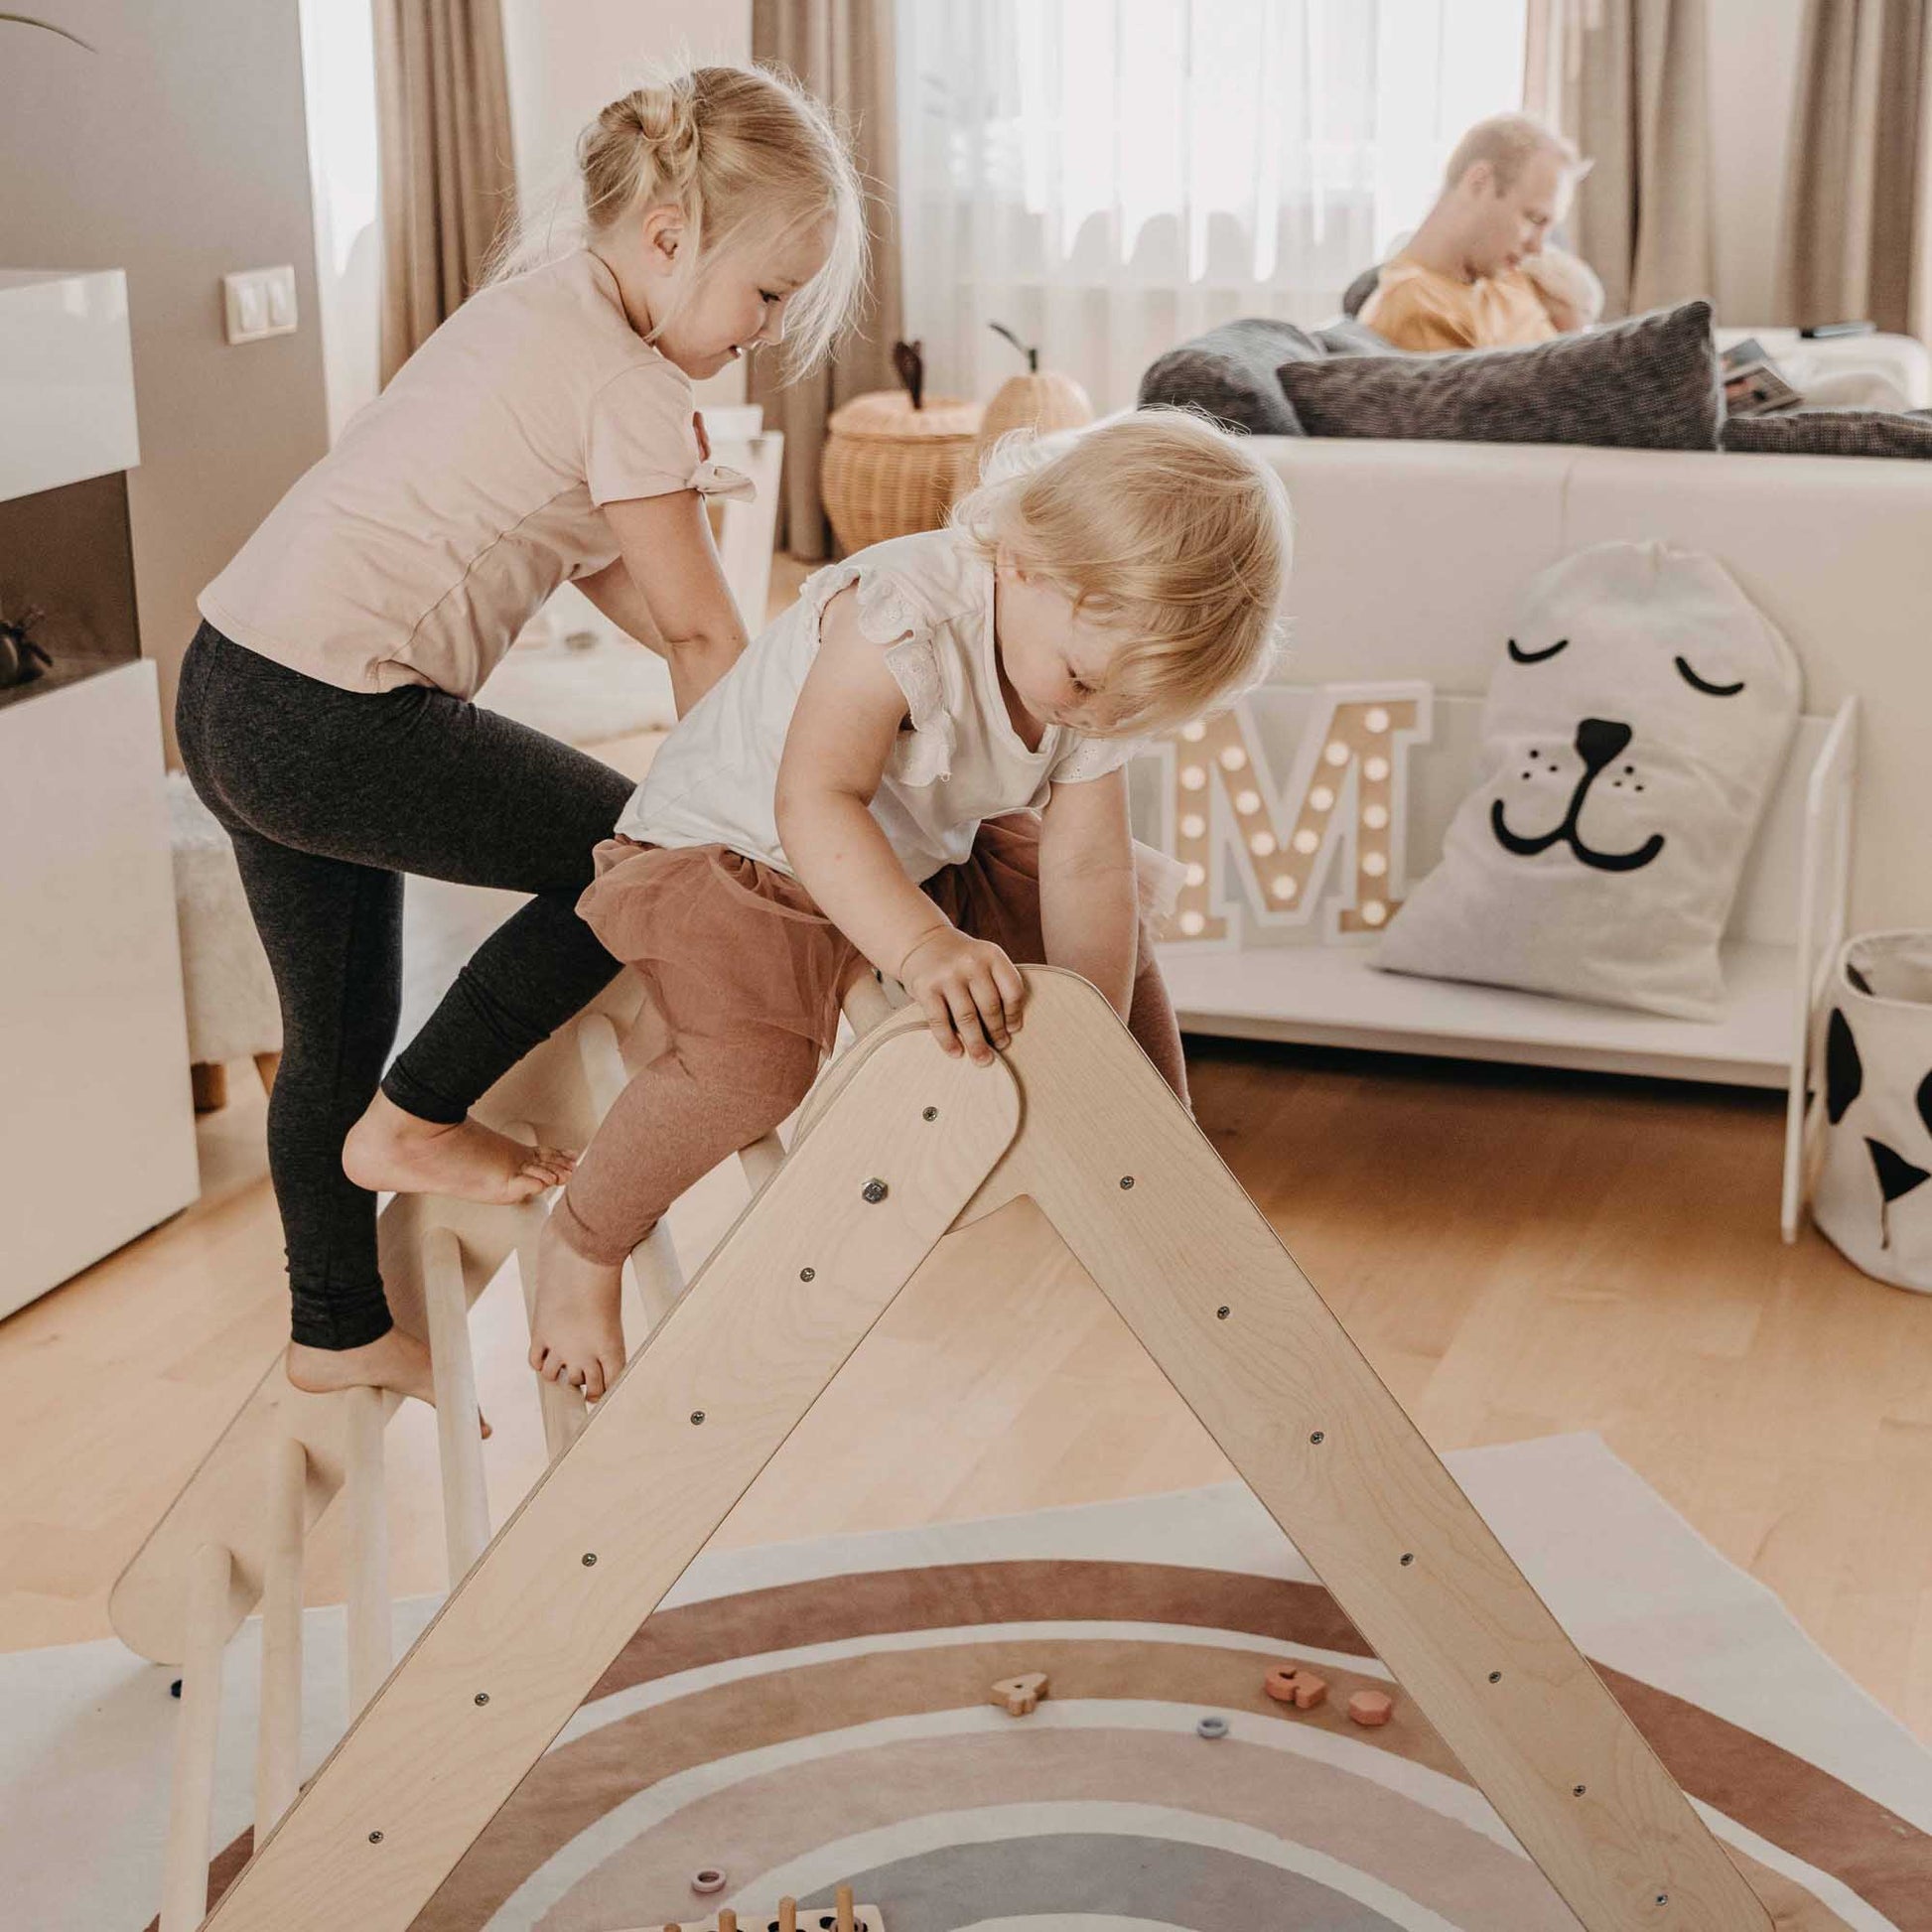 Two children, while playing with a foldable climbing triangle with 2 slope levels in a living room, are enhancing their motor skills.